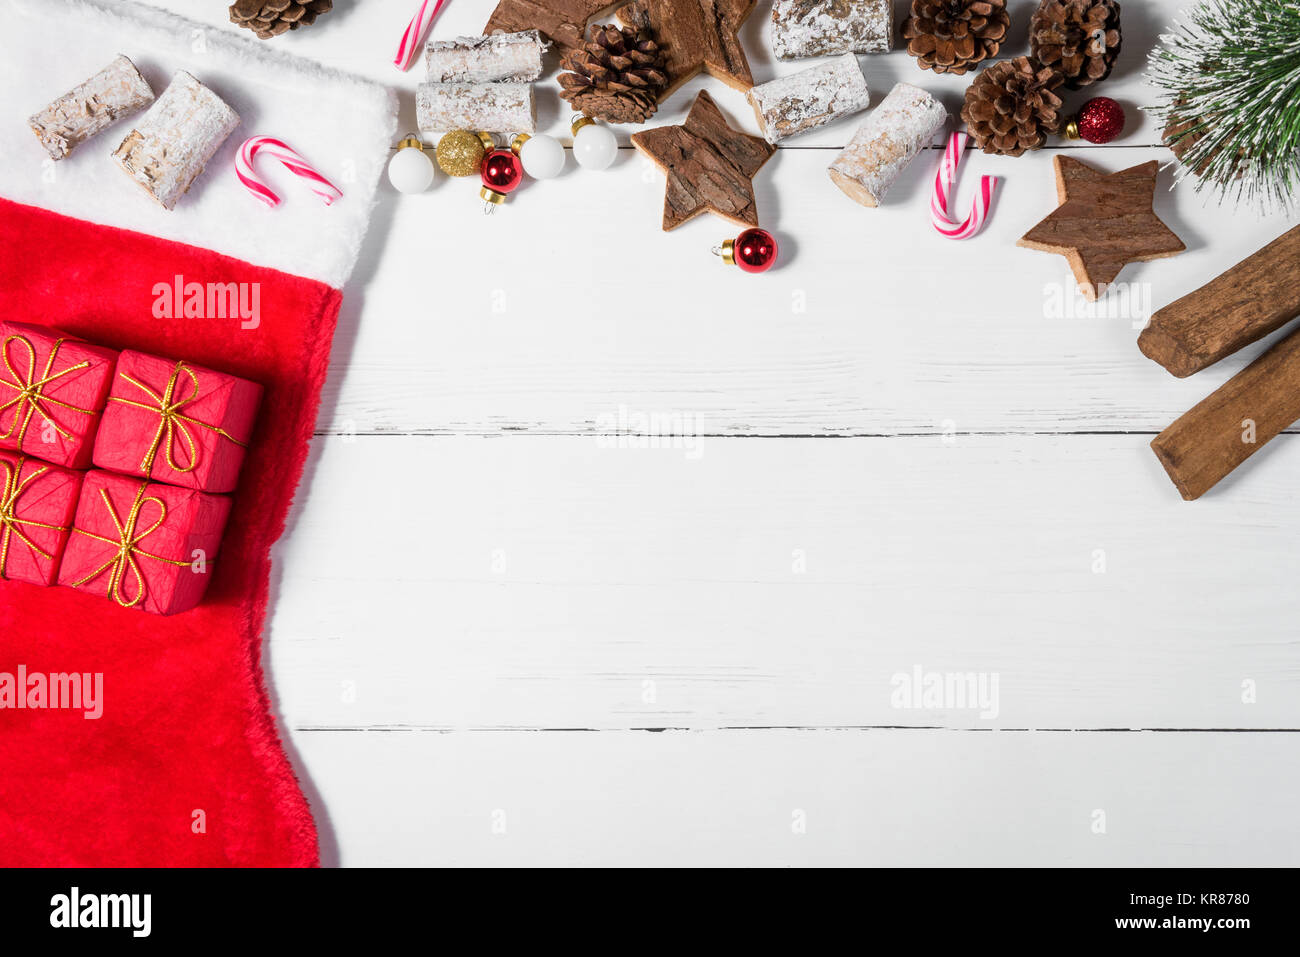 Christmas Stocking and Ornaments Spread Out over White Wooden Table Stock Photo